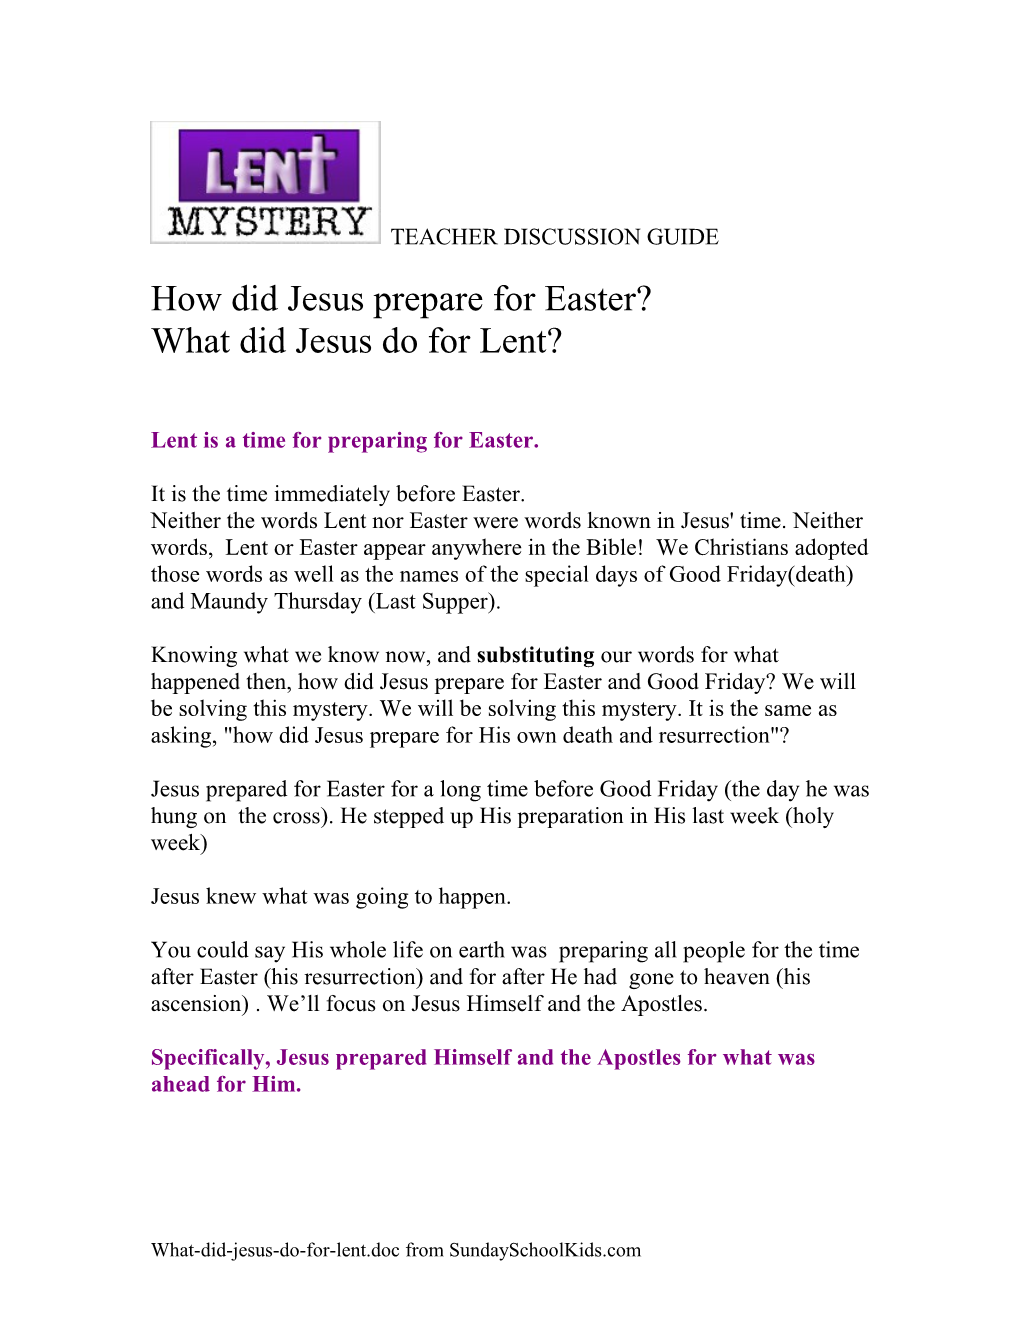 Lent Is a Time for Preparing for Easter